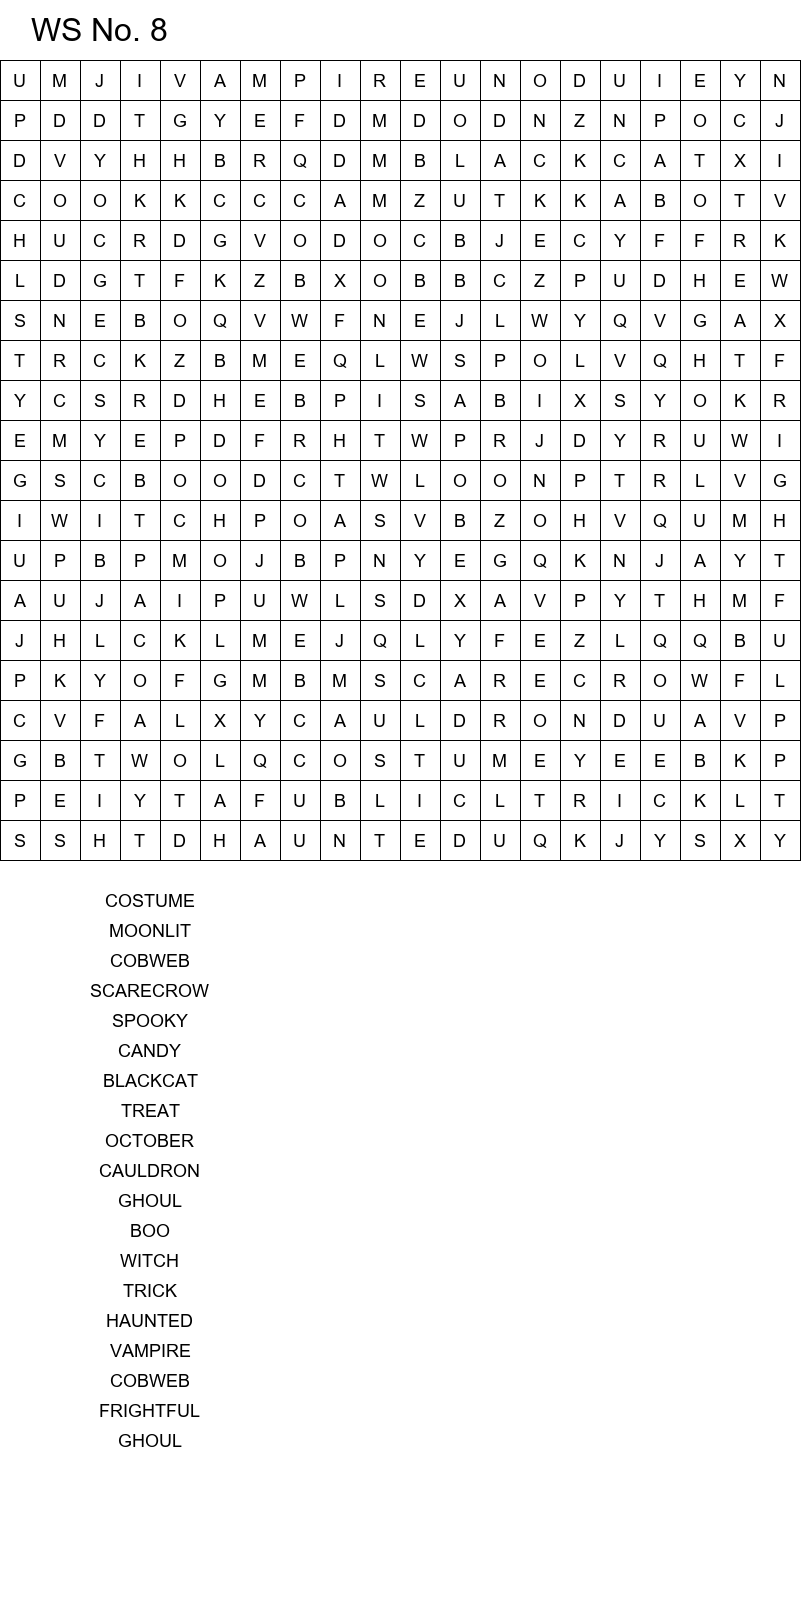 Free online Halloween word search puzzles size 20x20 No 8